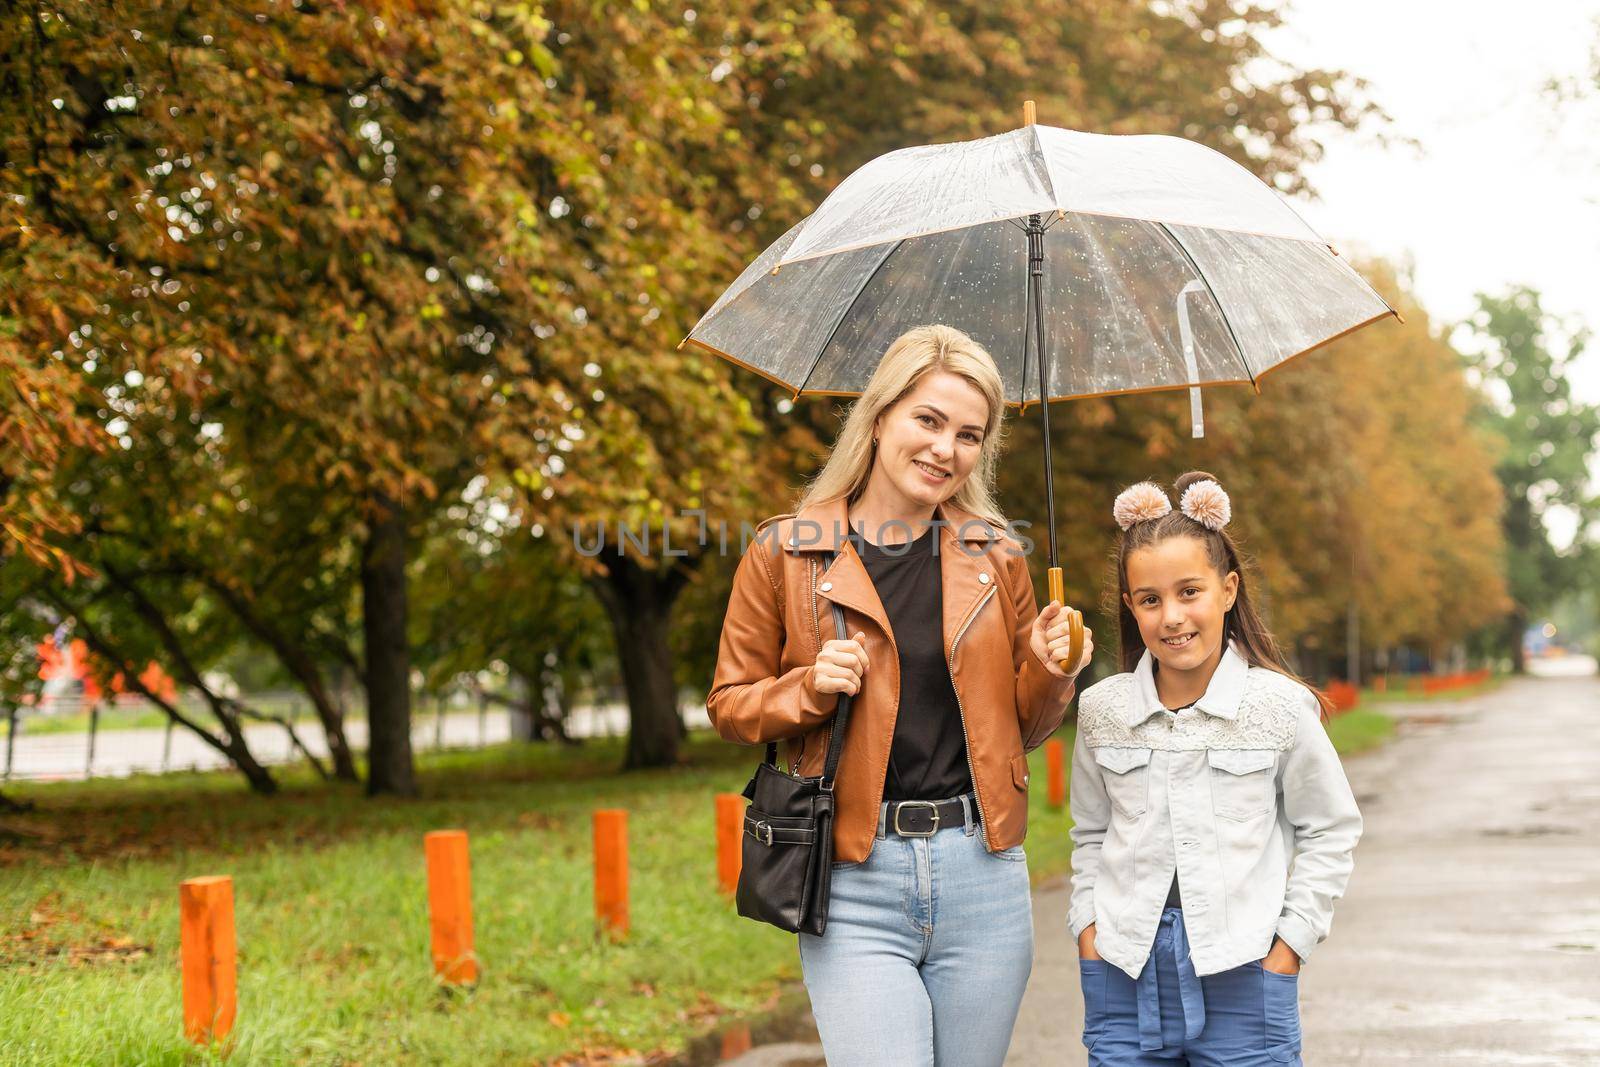 Cheerful mother and her little daughter having fun together in the autumn background under the umbrella. Happy family in the fall background.